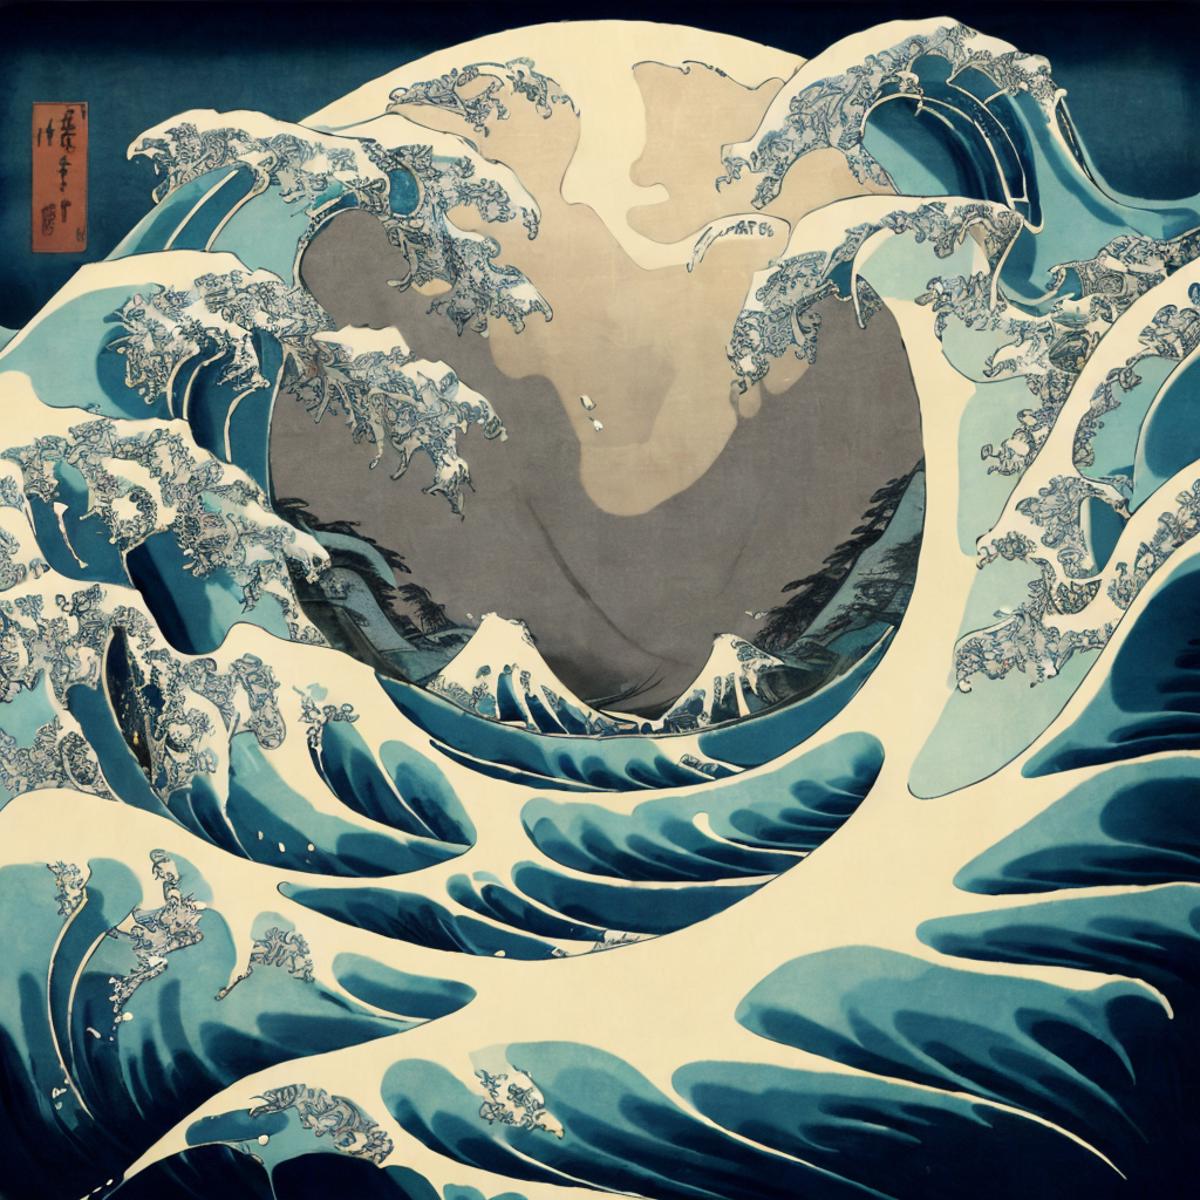 The Great Wave off Kanagawa art style lora image by getphat